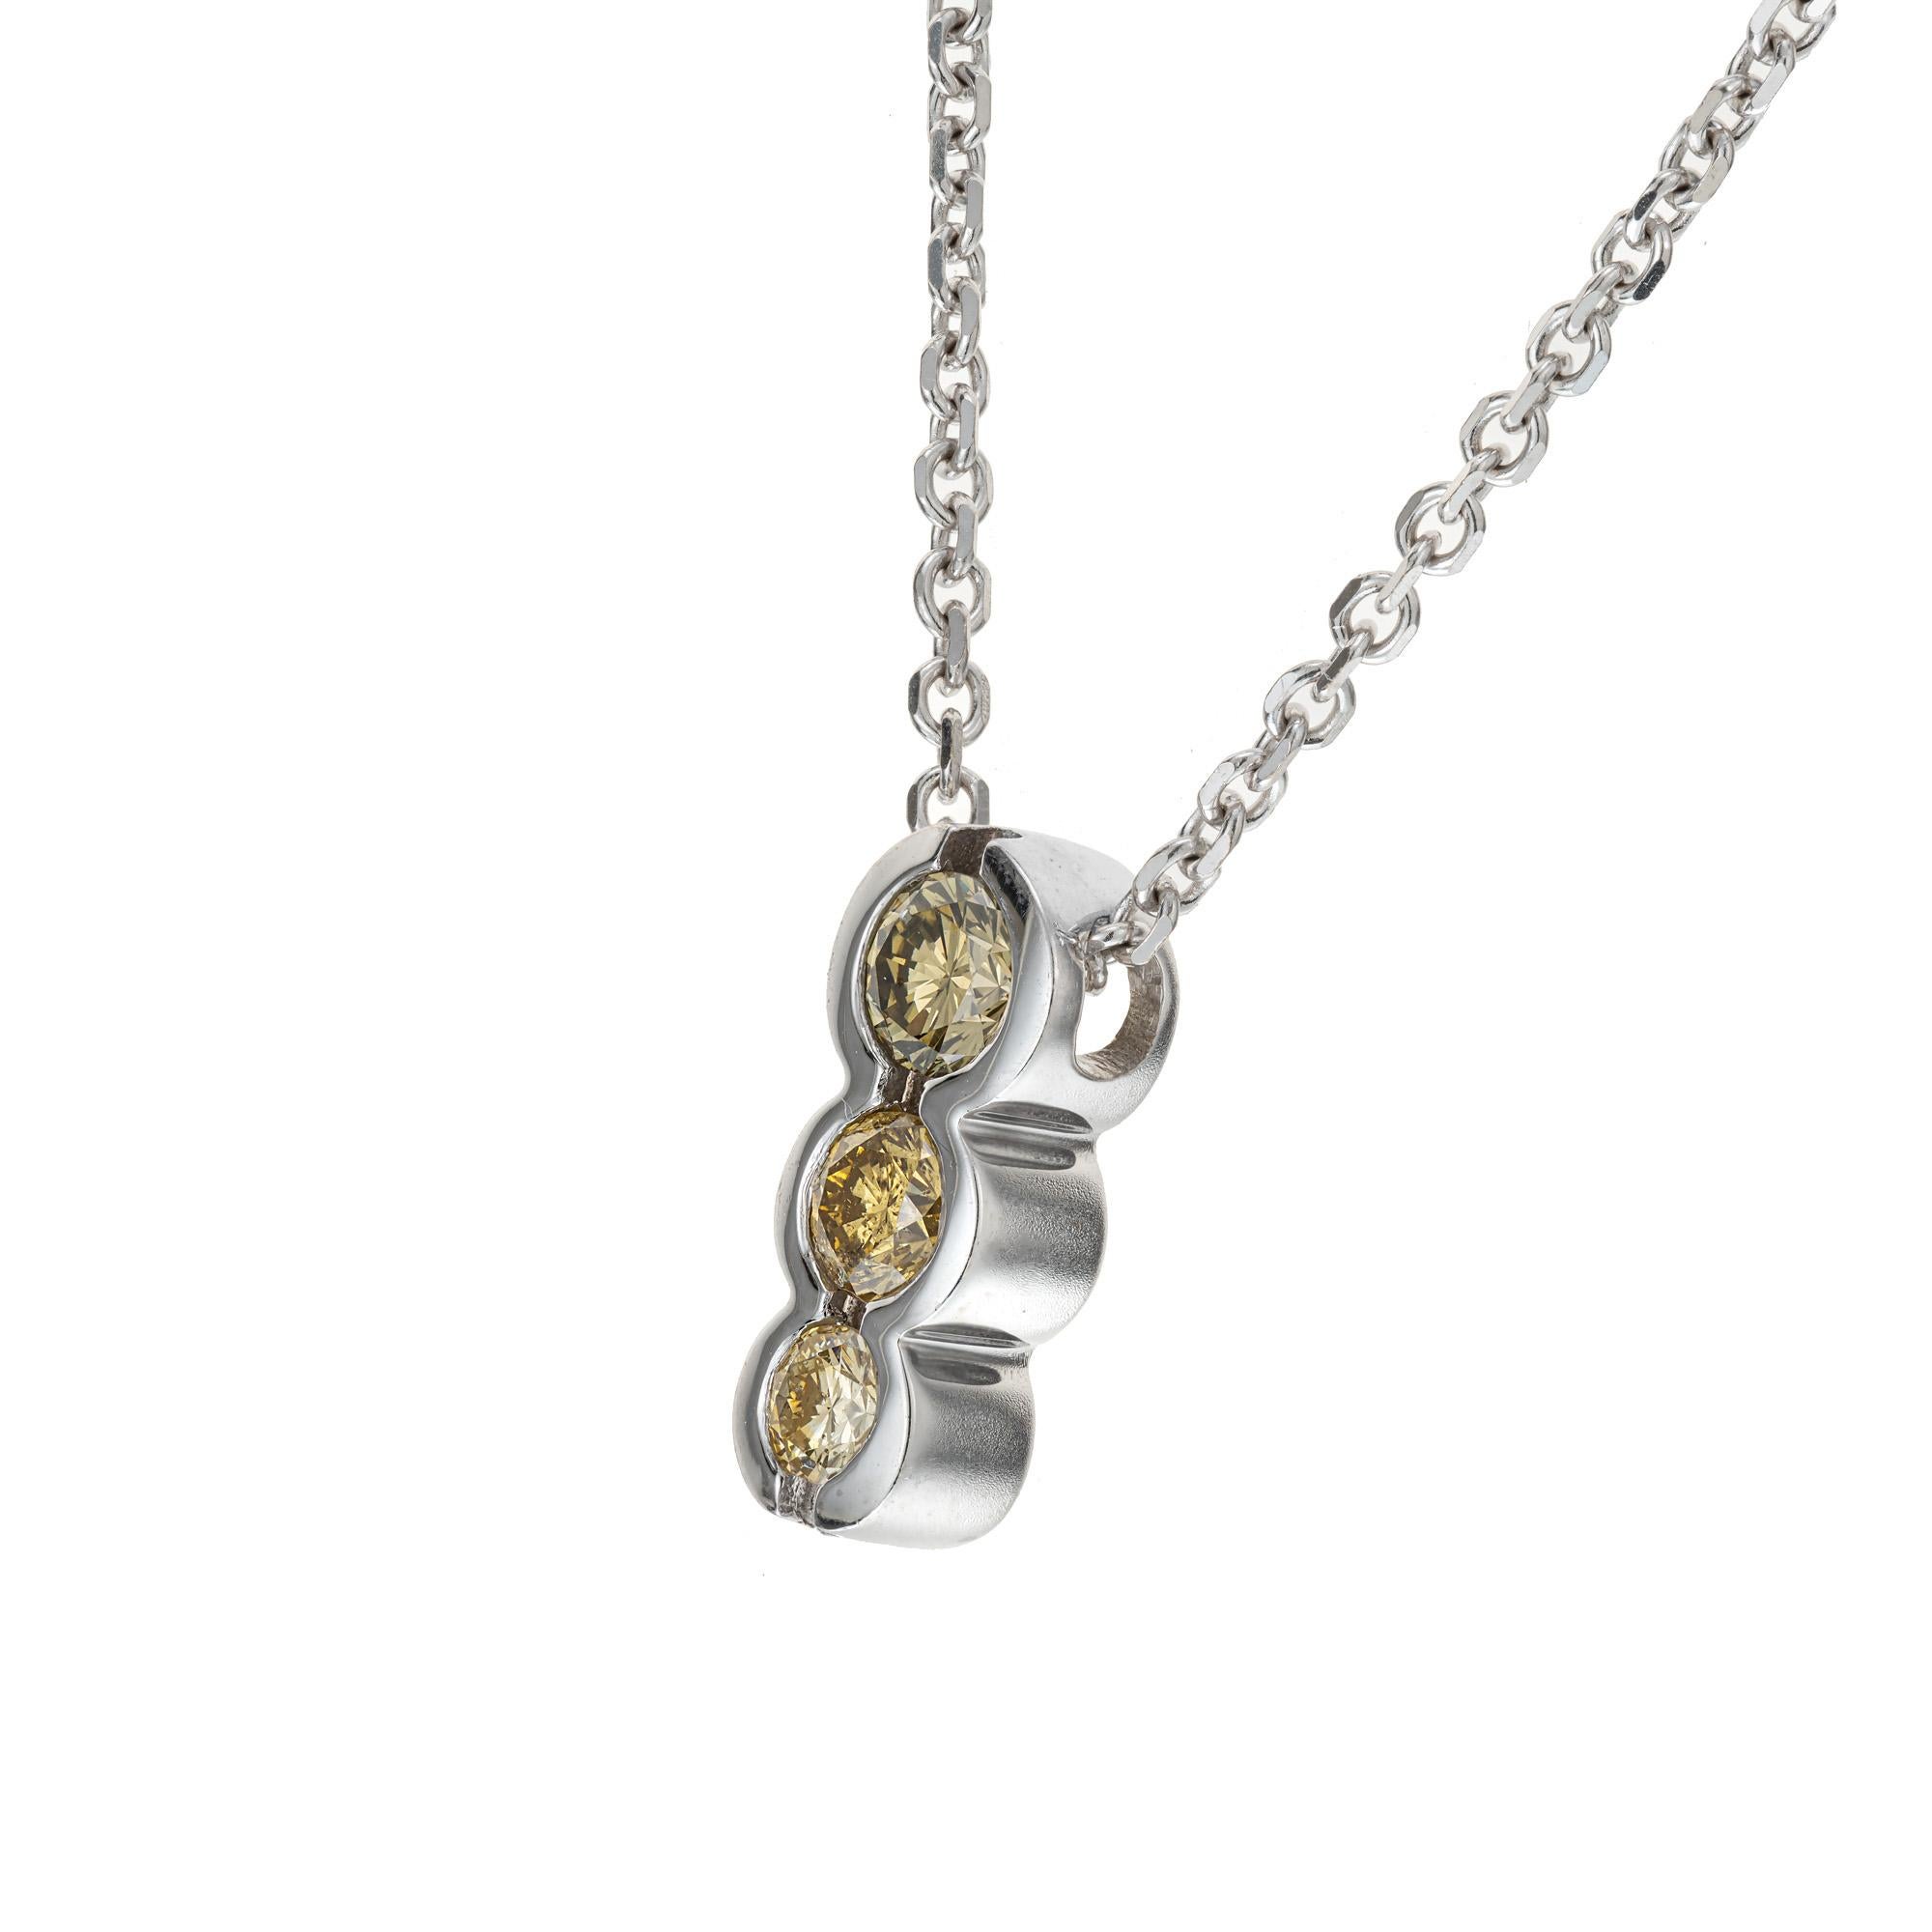 Estate 14k white gold very interesting necklace with 3 natural yellow diamonds. Well matched and in excellent condition. Slightly darker yellow at the top. Slightly lighter yellow at the bottom.

3 round natural fancy yellow diamonds approx. total